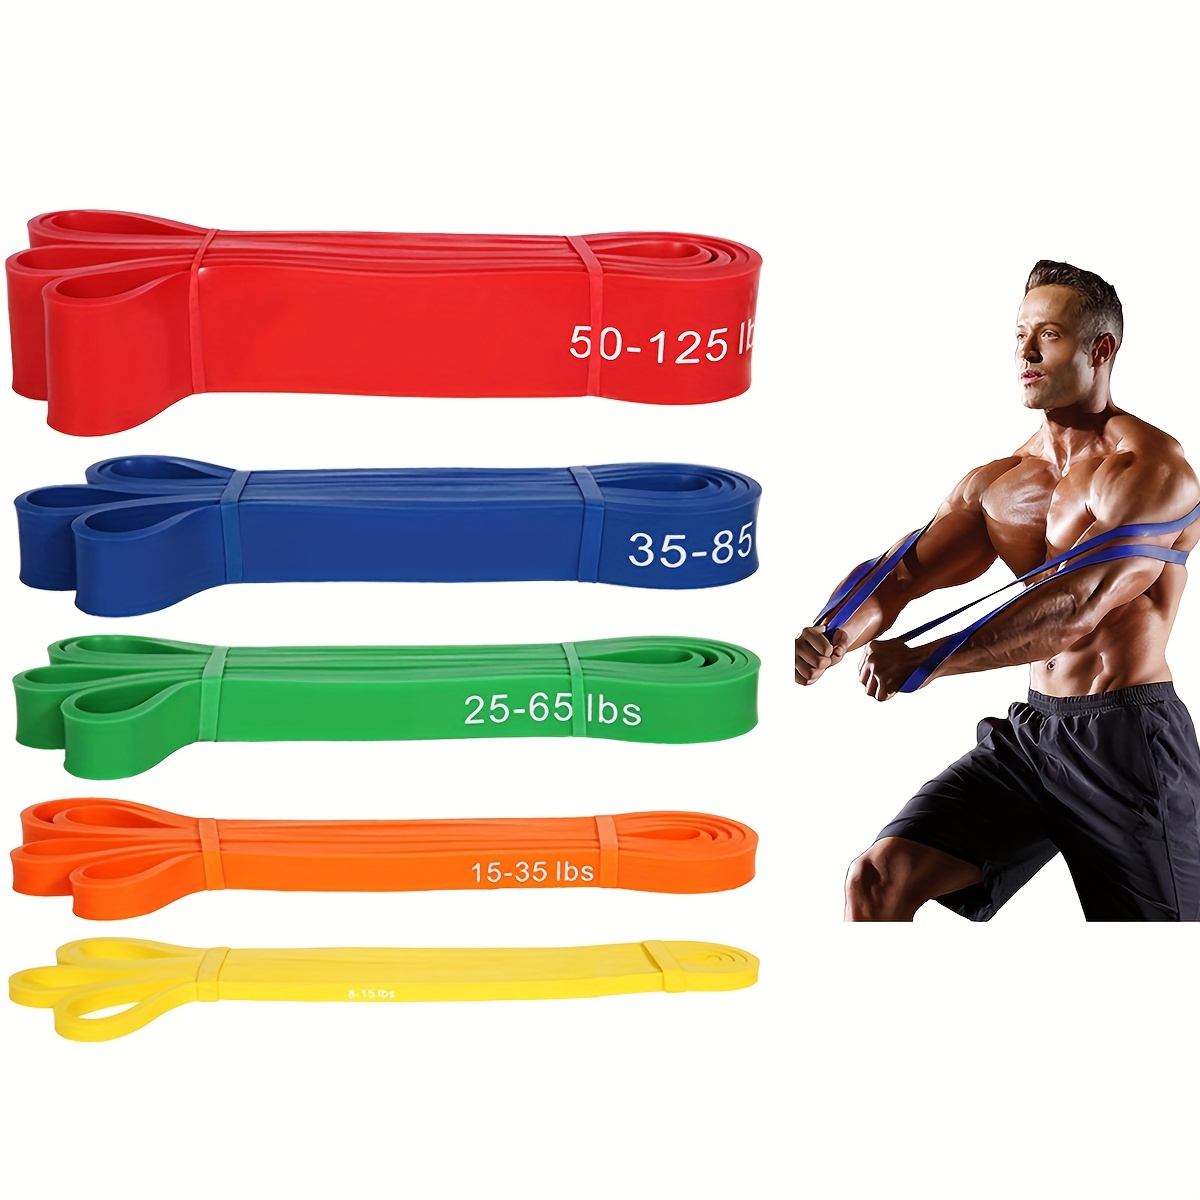 How Effective are Resistance Band Workouts for Weight Loss?